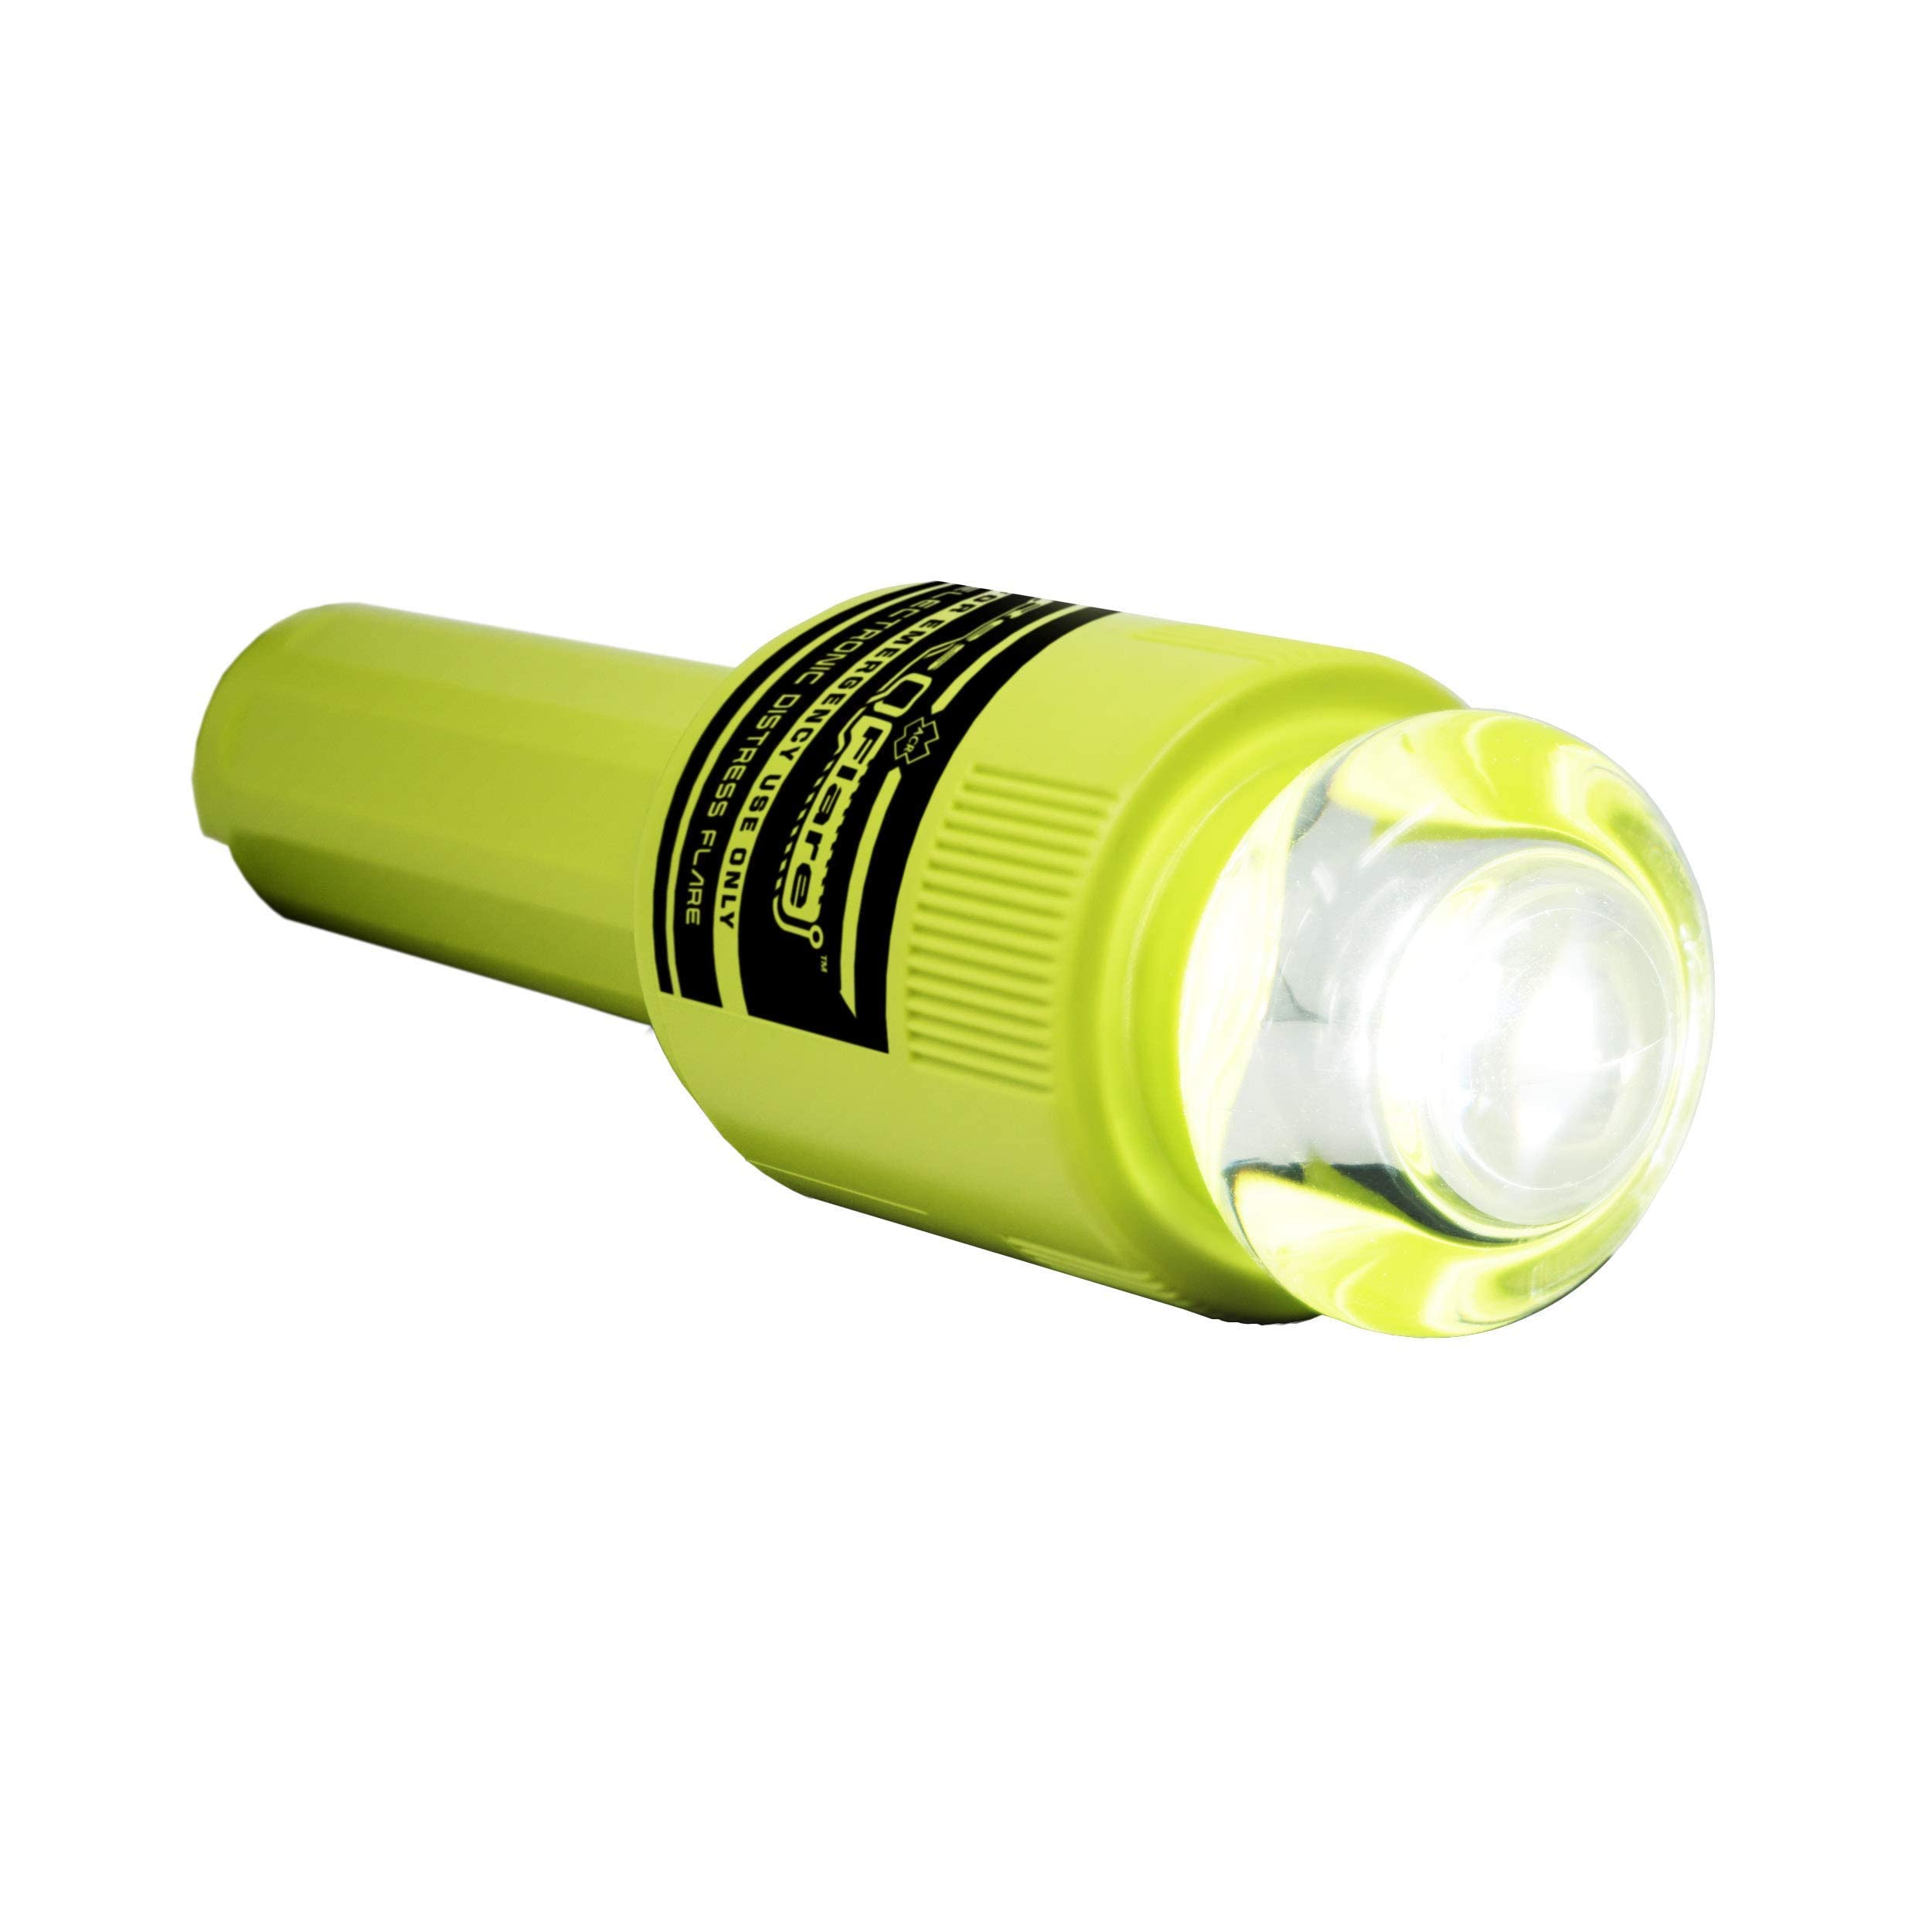 acr ResQFlare Electronic Distress E-Flare and Flag, USCG Approved Replacement for Pyrotechnic Flares 3966